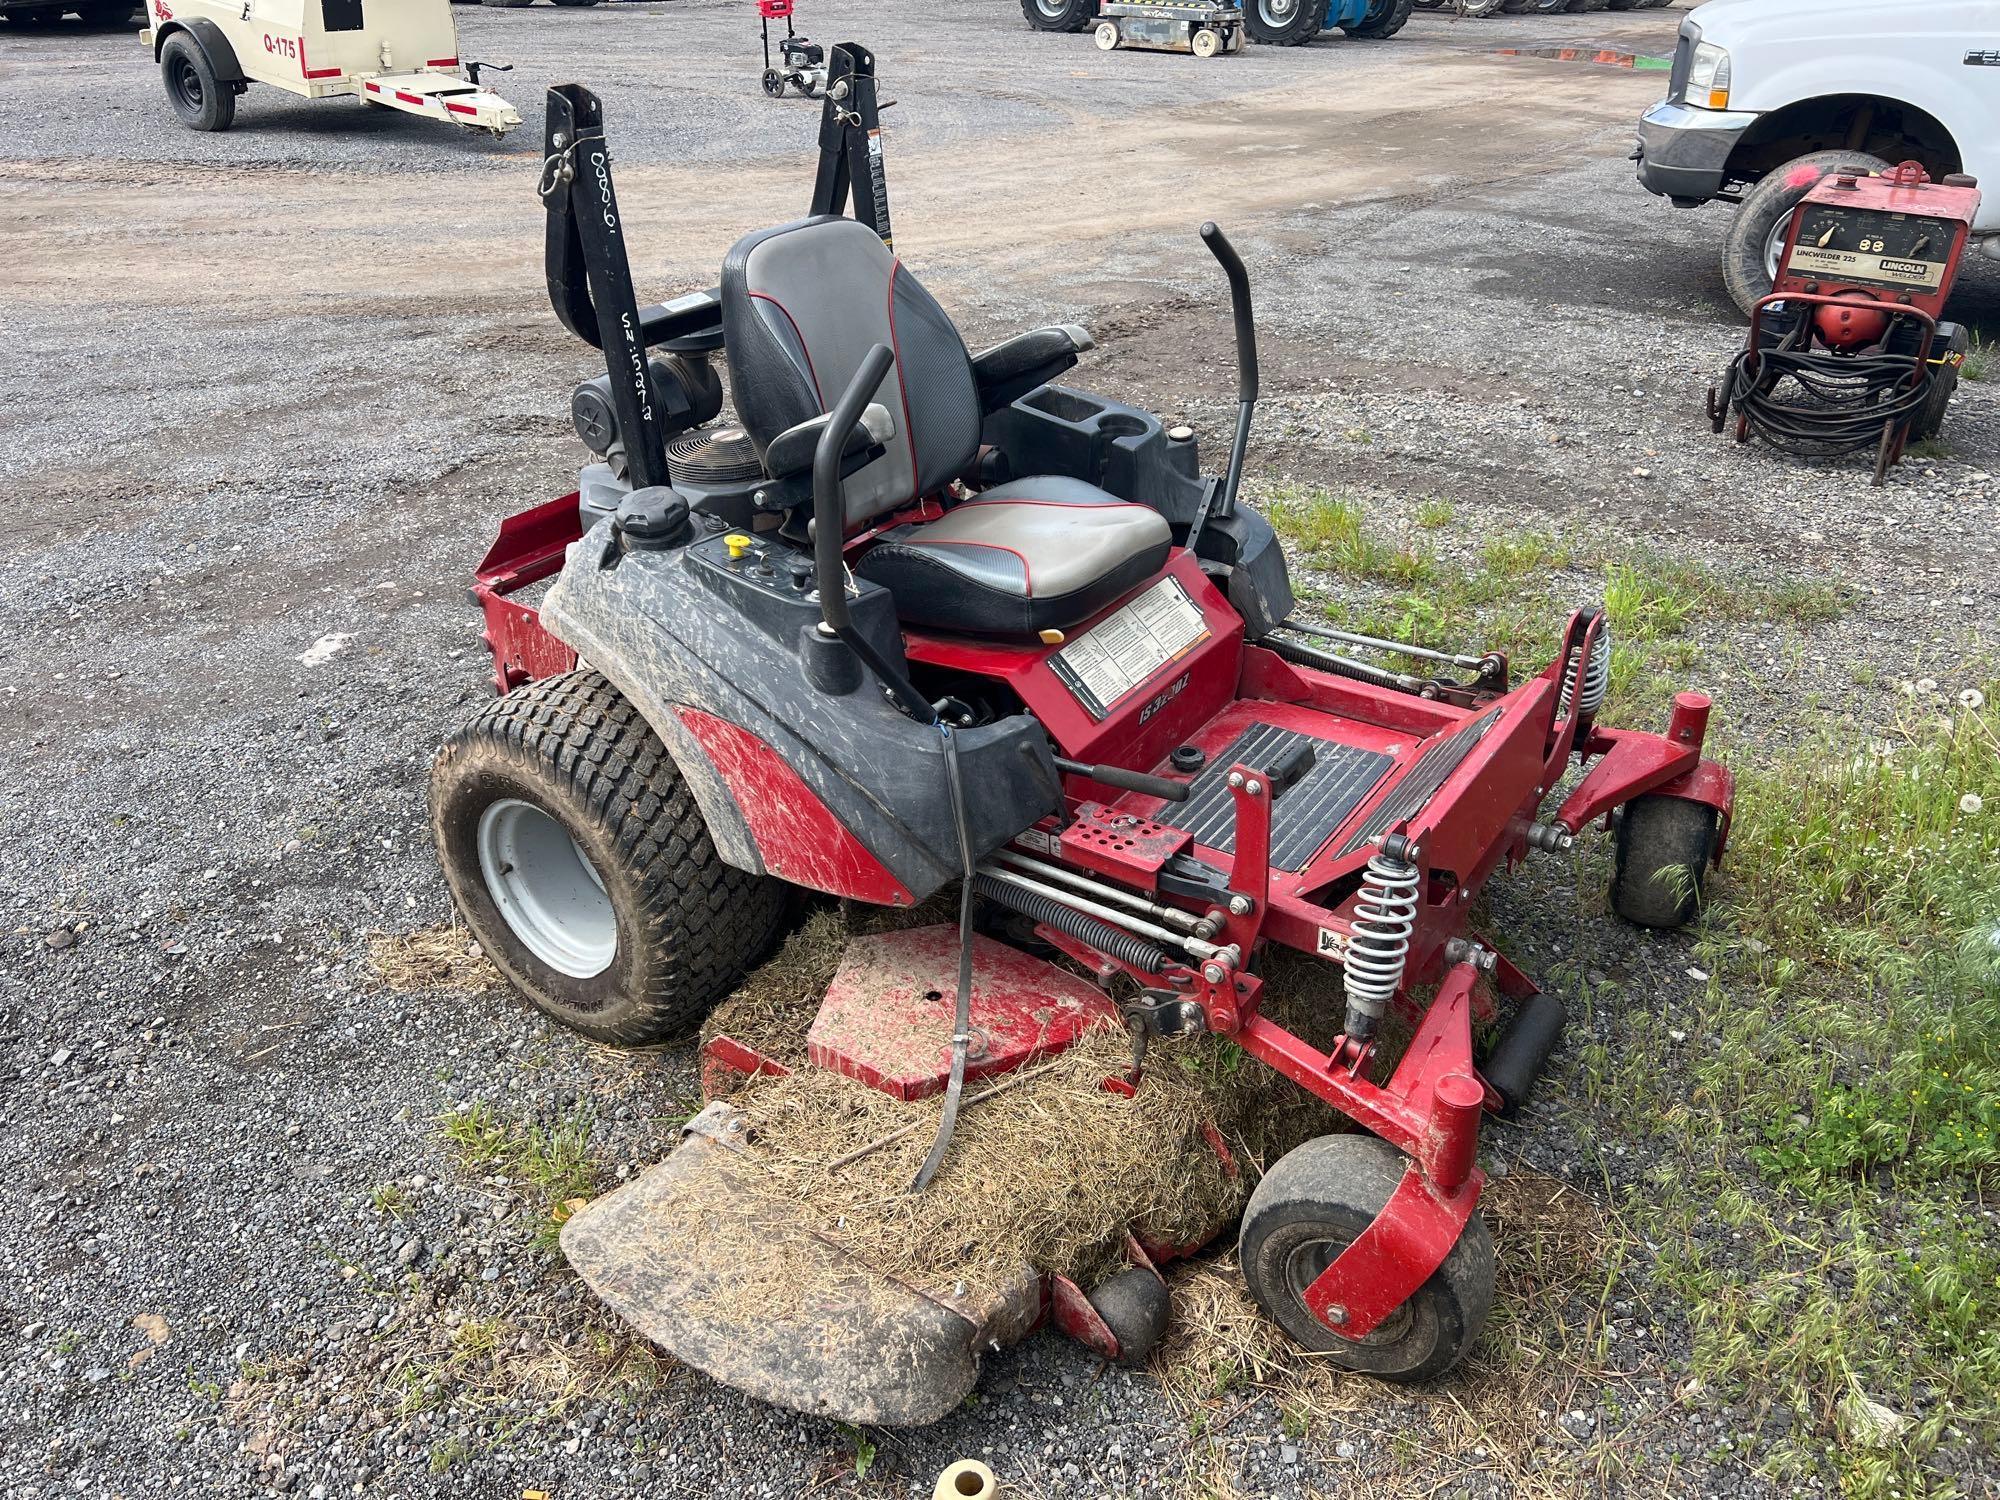 FERRIS IS3200Z COMMERCIAL MOWER SN-25272 powered by gas engine, equipped with 72in. Cutting deck,